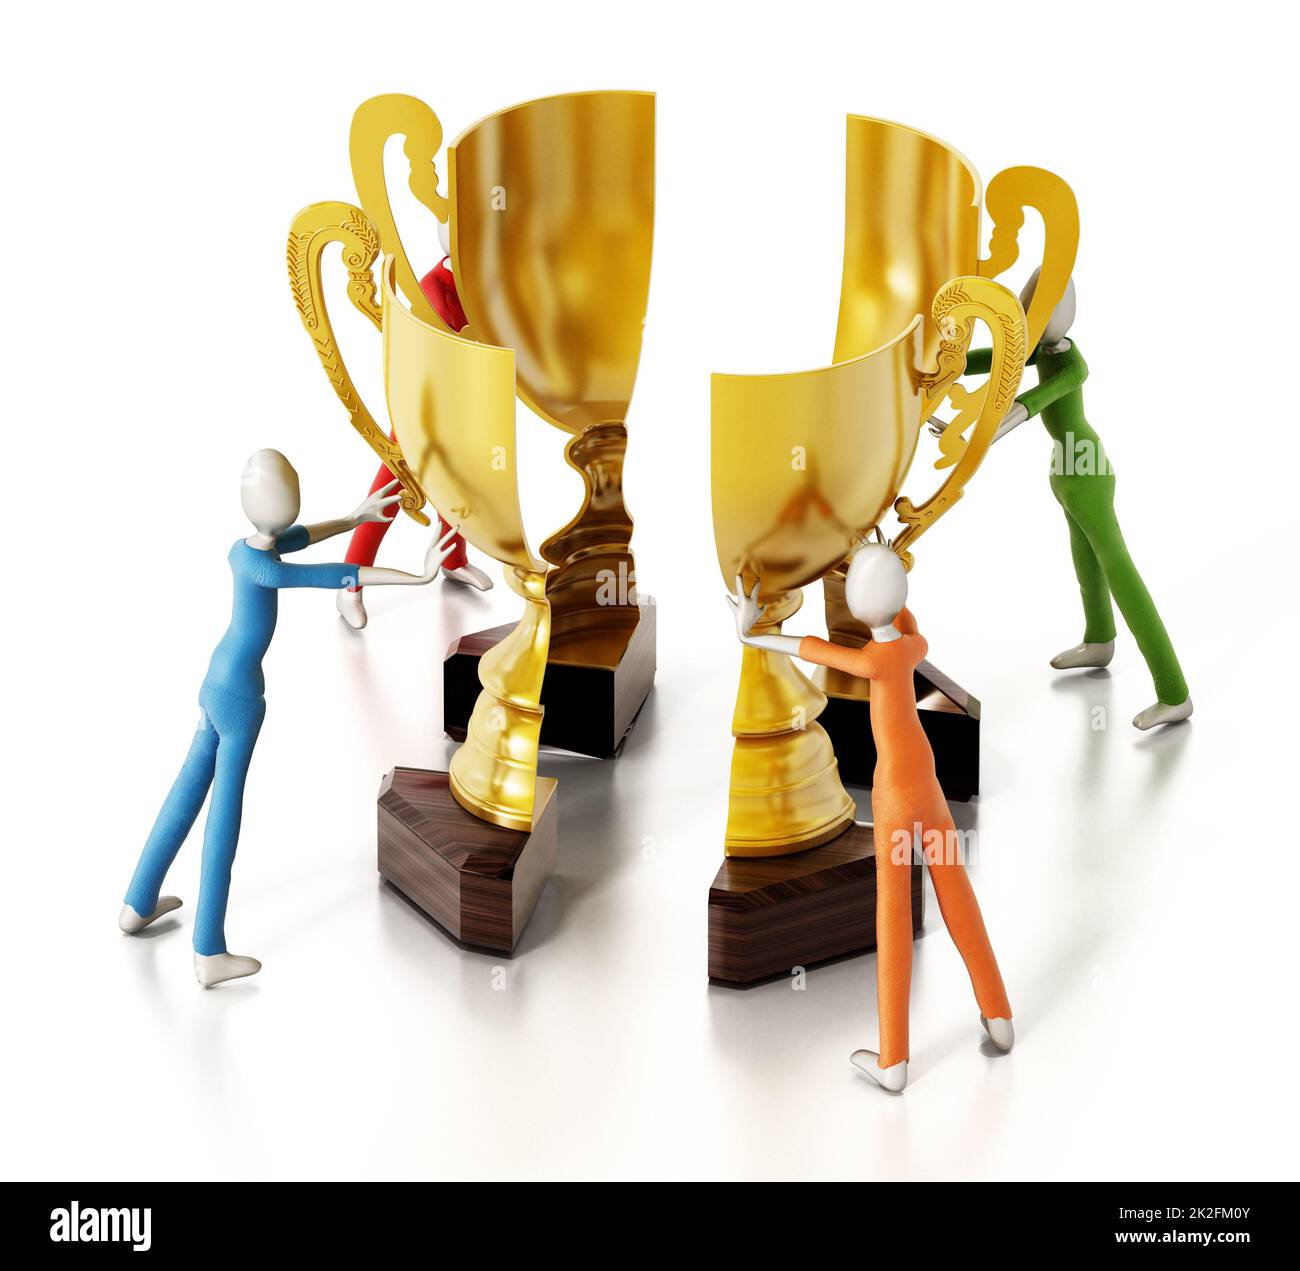 Four 3D figures bring together parts of the golden cup. 3D illustration Stock Photo